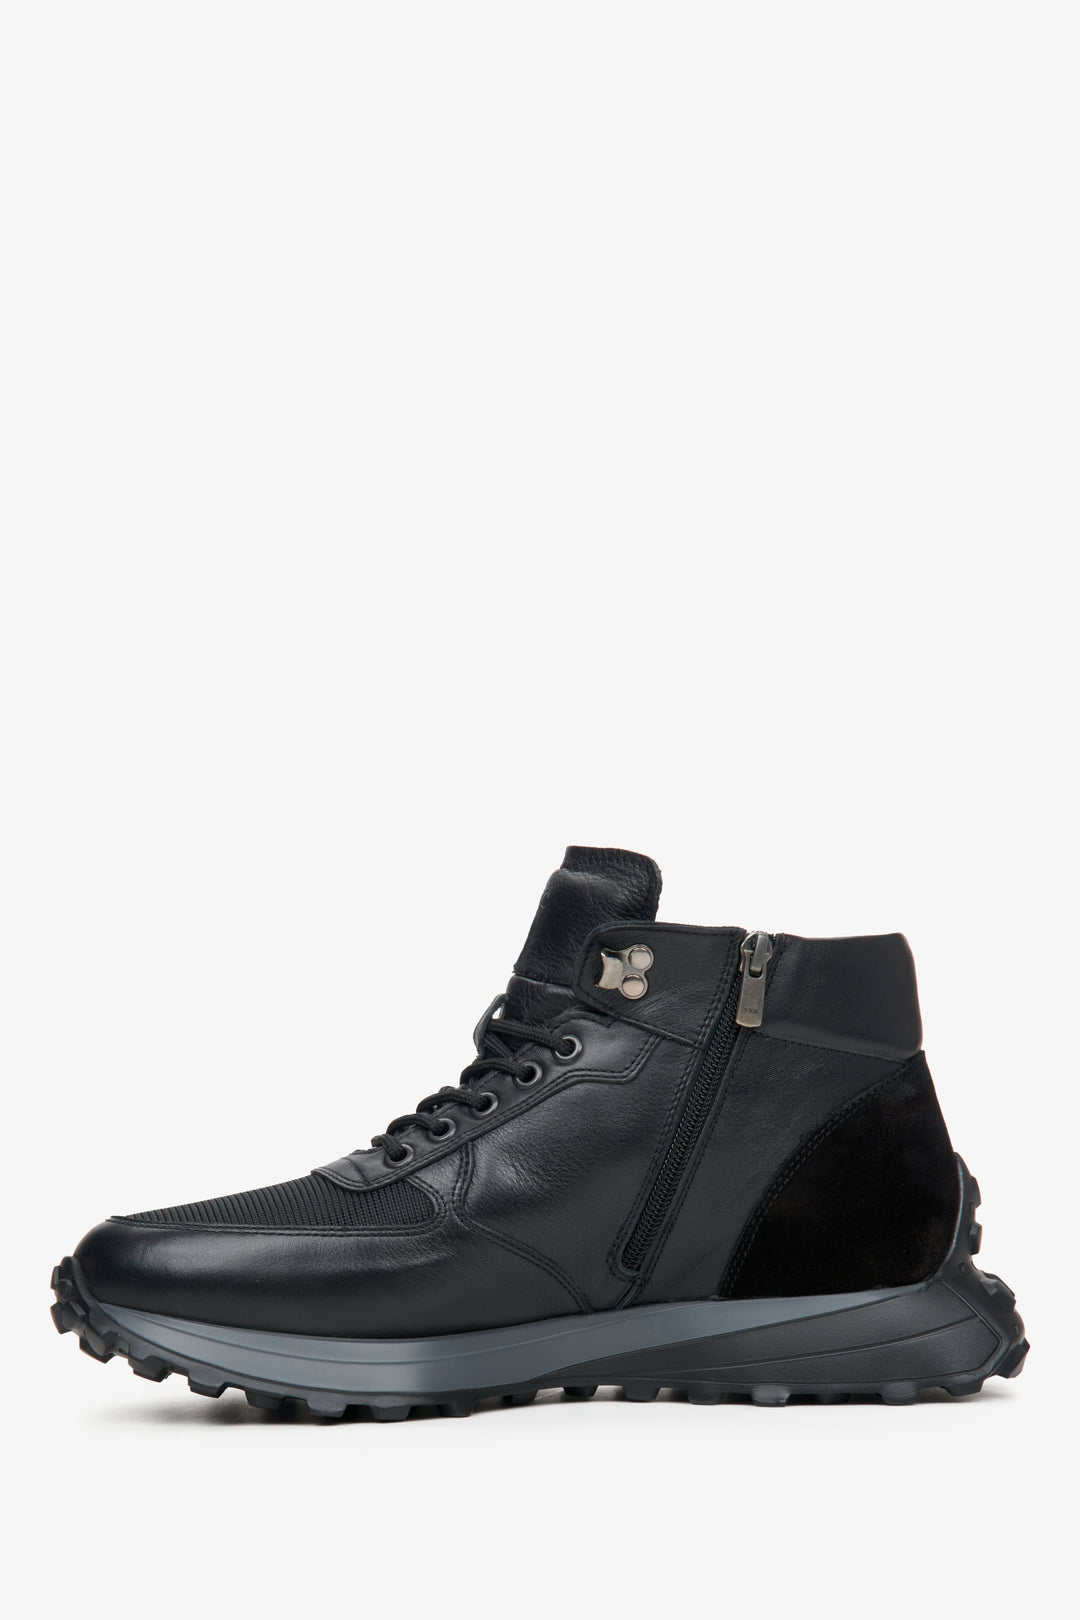 High-top men's black leather  sneakers - shoe profile.